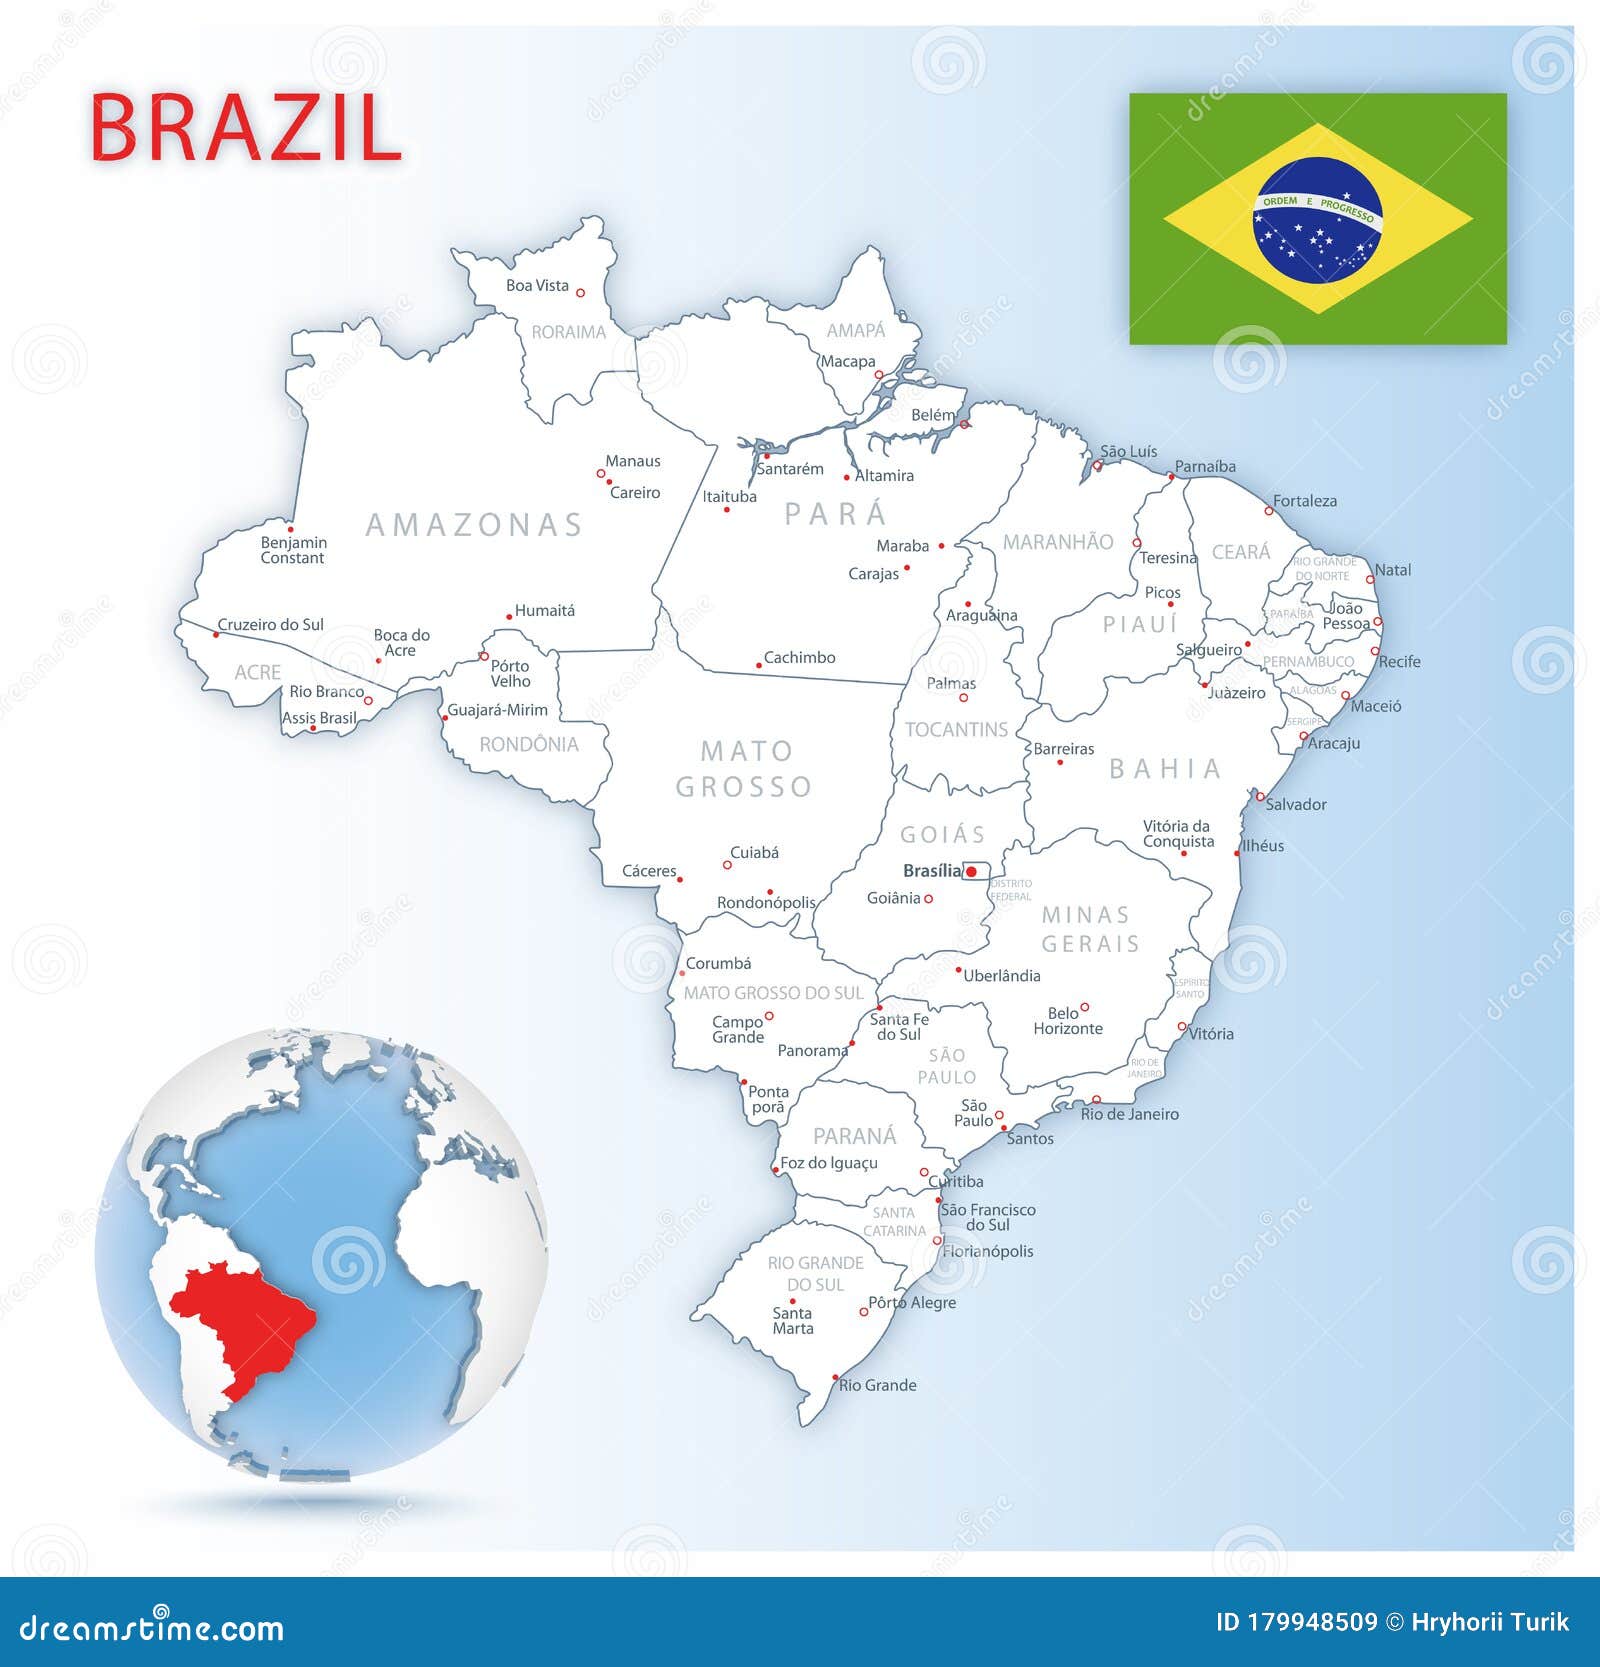 Brazil Locator Map - Country And Capital City Brasilia. Map Of